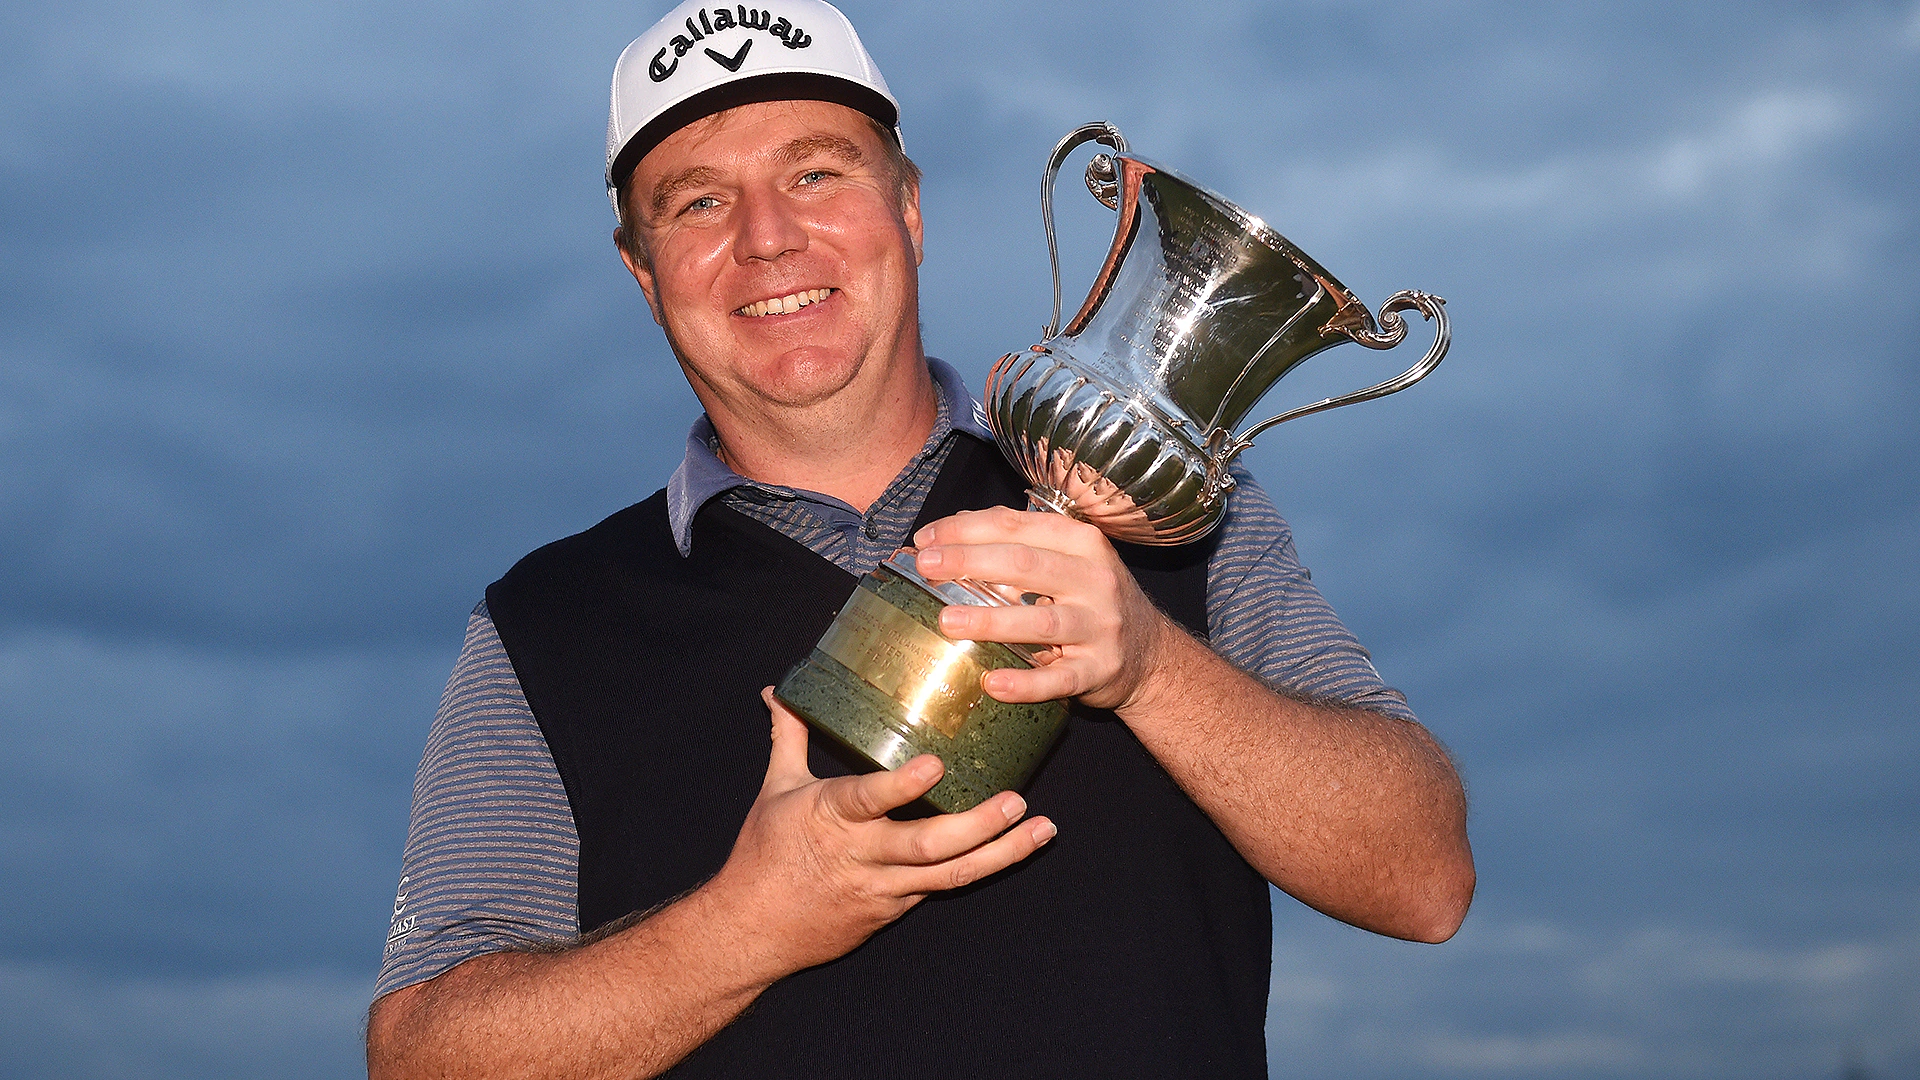 Ross McGowan wins first European Tour event in 11 years at Italian Open